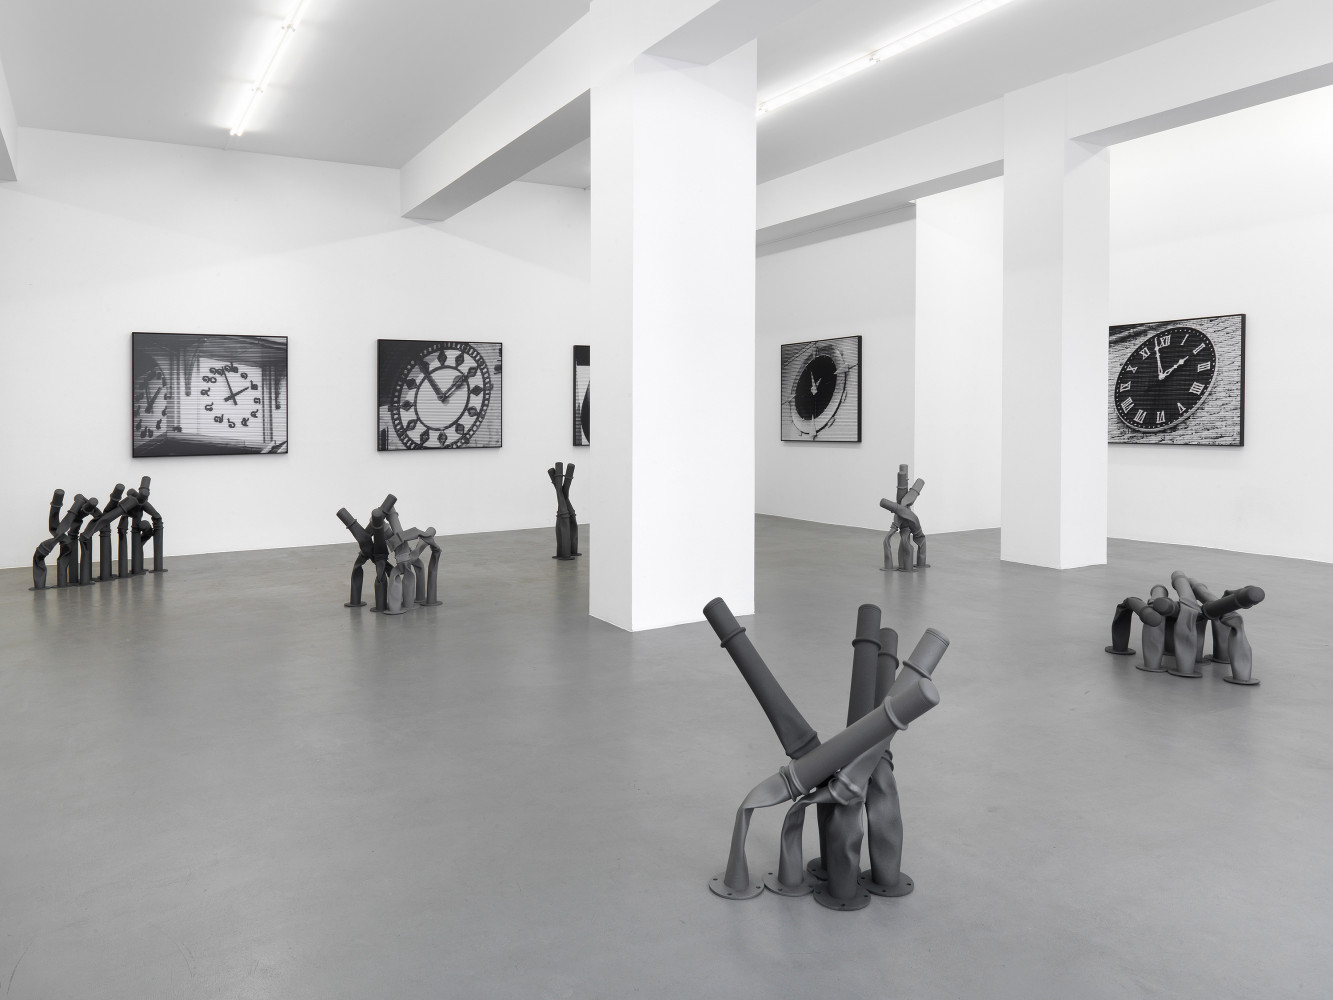 Bettina Pousttchi, ‘Off the Clock’, Installation view, Buchmann Galerie, 2013